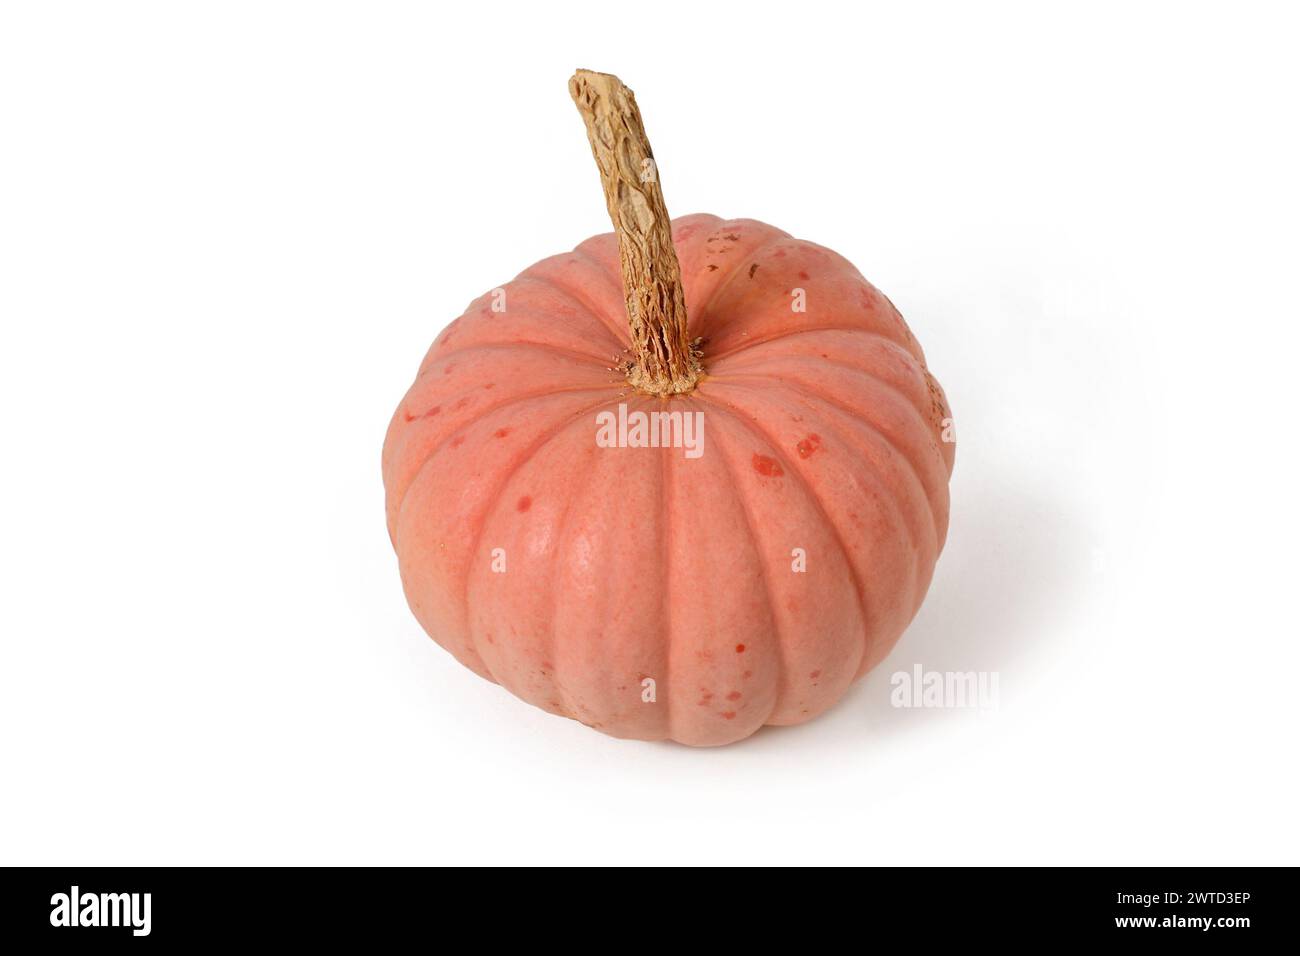 Single pastel pink colored 'Miss Sophie Pink' Halloween pumpkin on white background Stock Photo